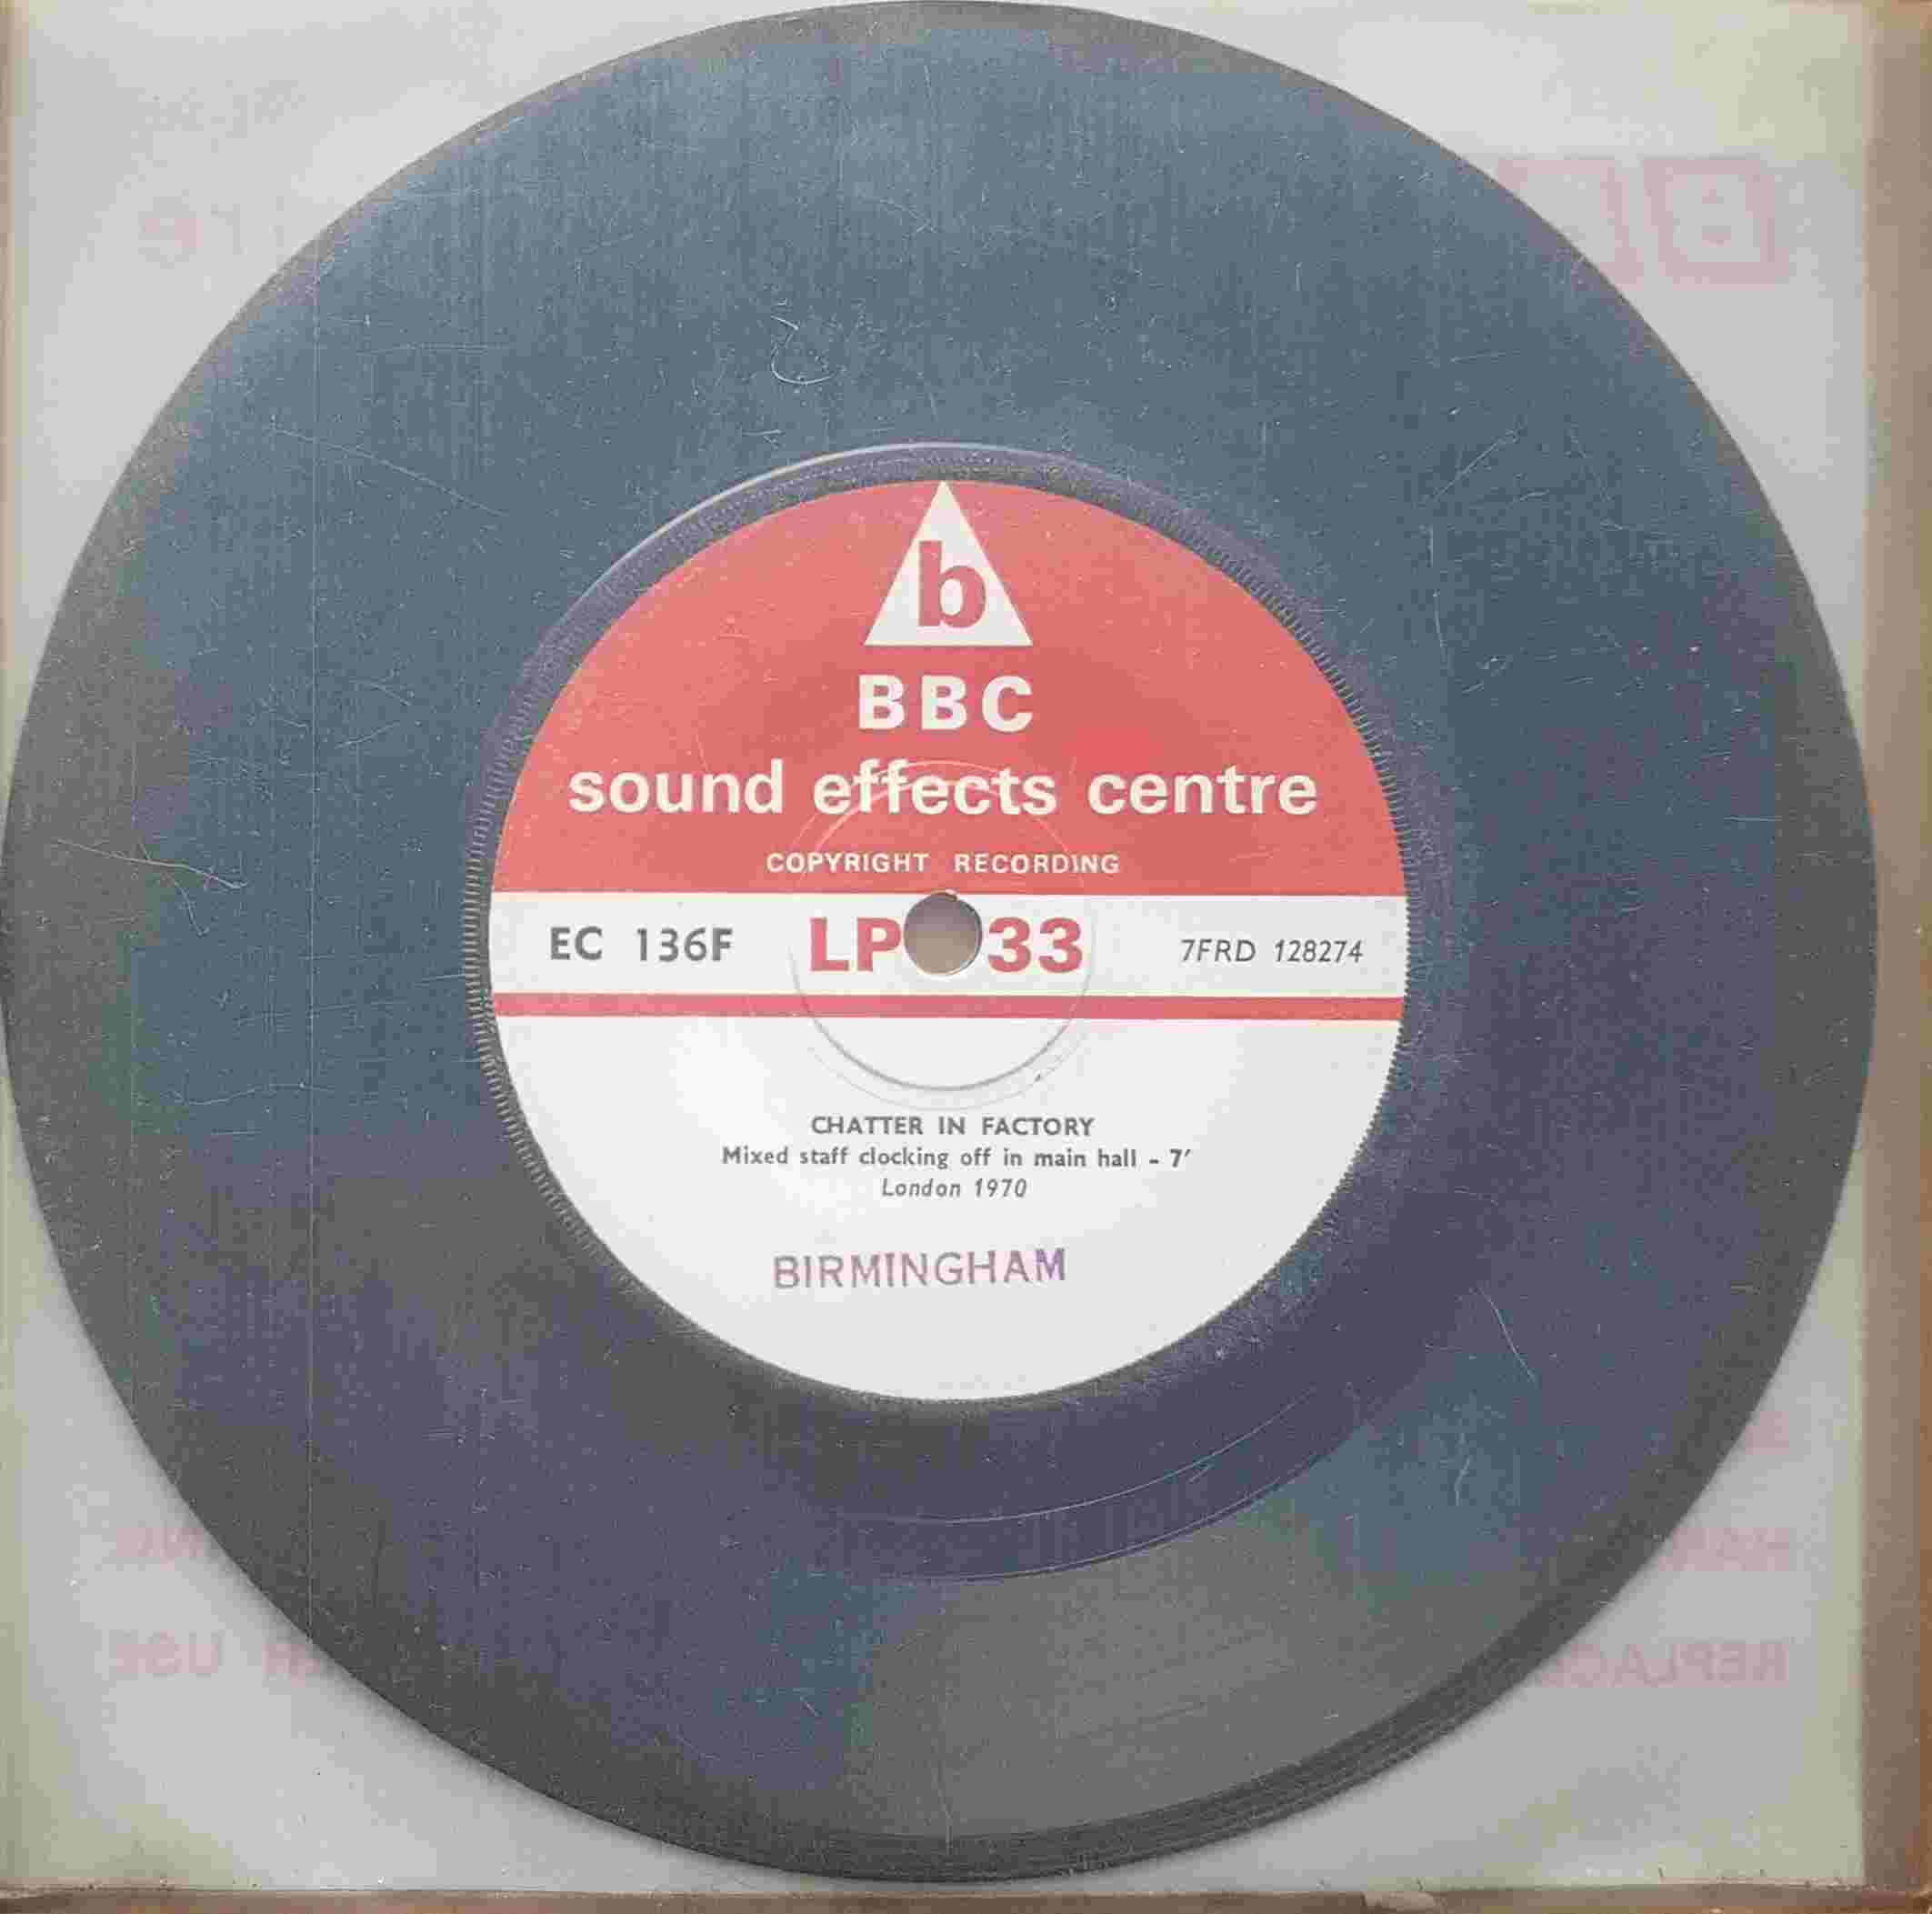 Picture of EC 136F Chatter in factory (London) by artist Not registered from the BBC records and Tapes library